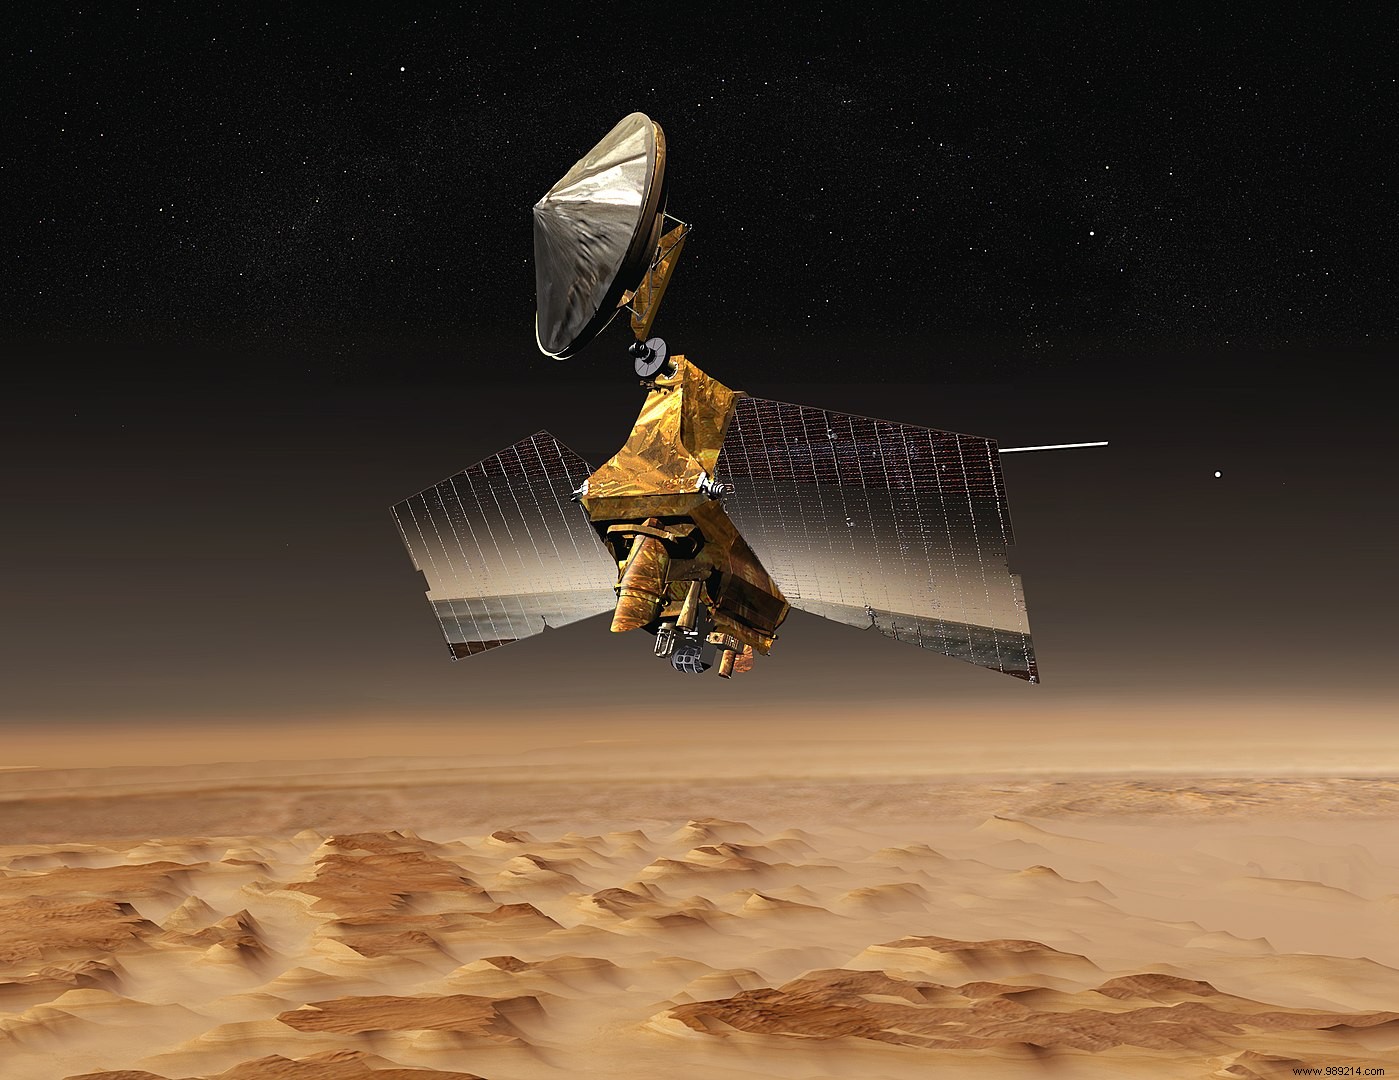 Around Mars, several probes will have their eyes on Perseverance 